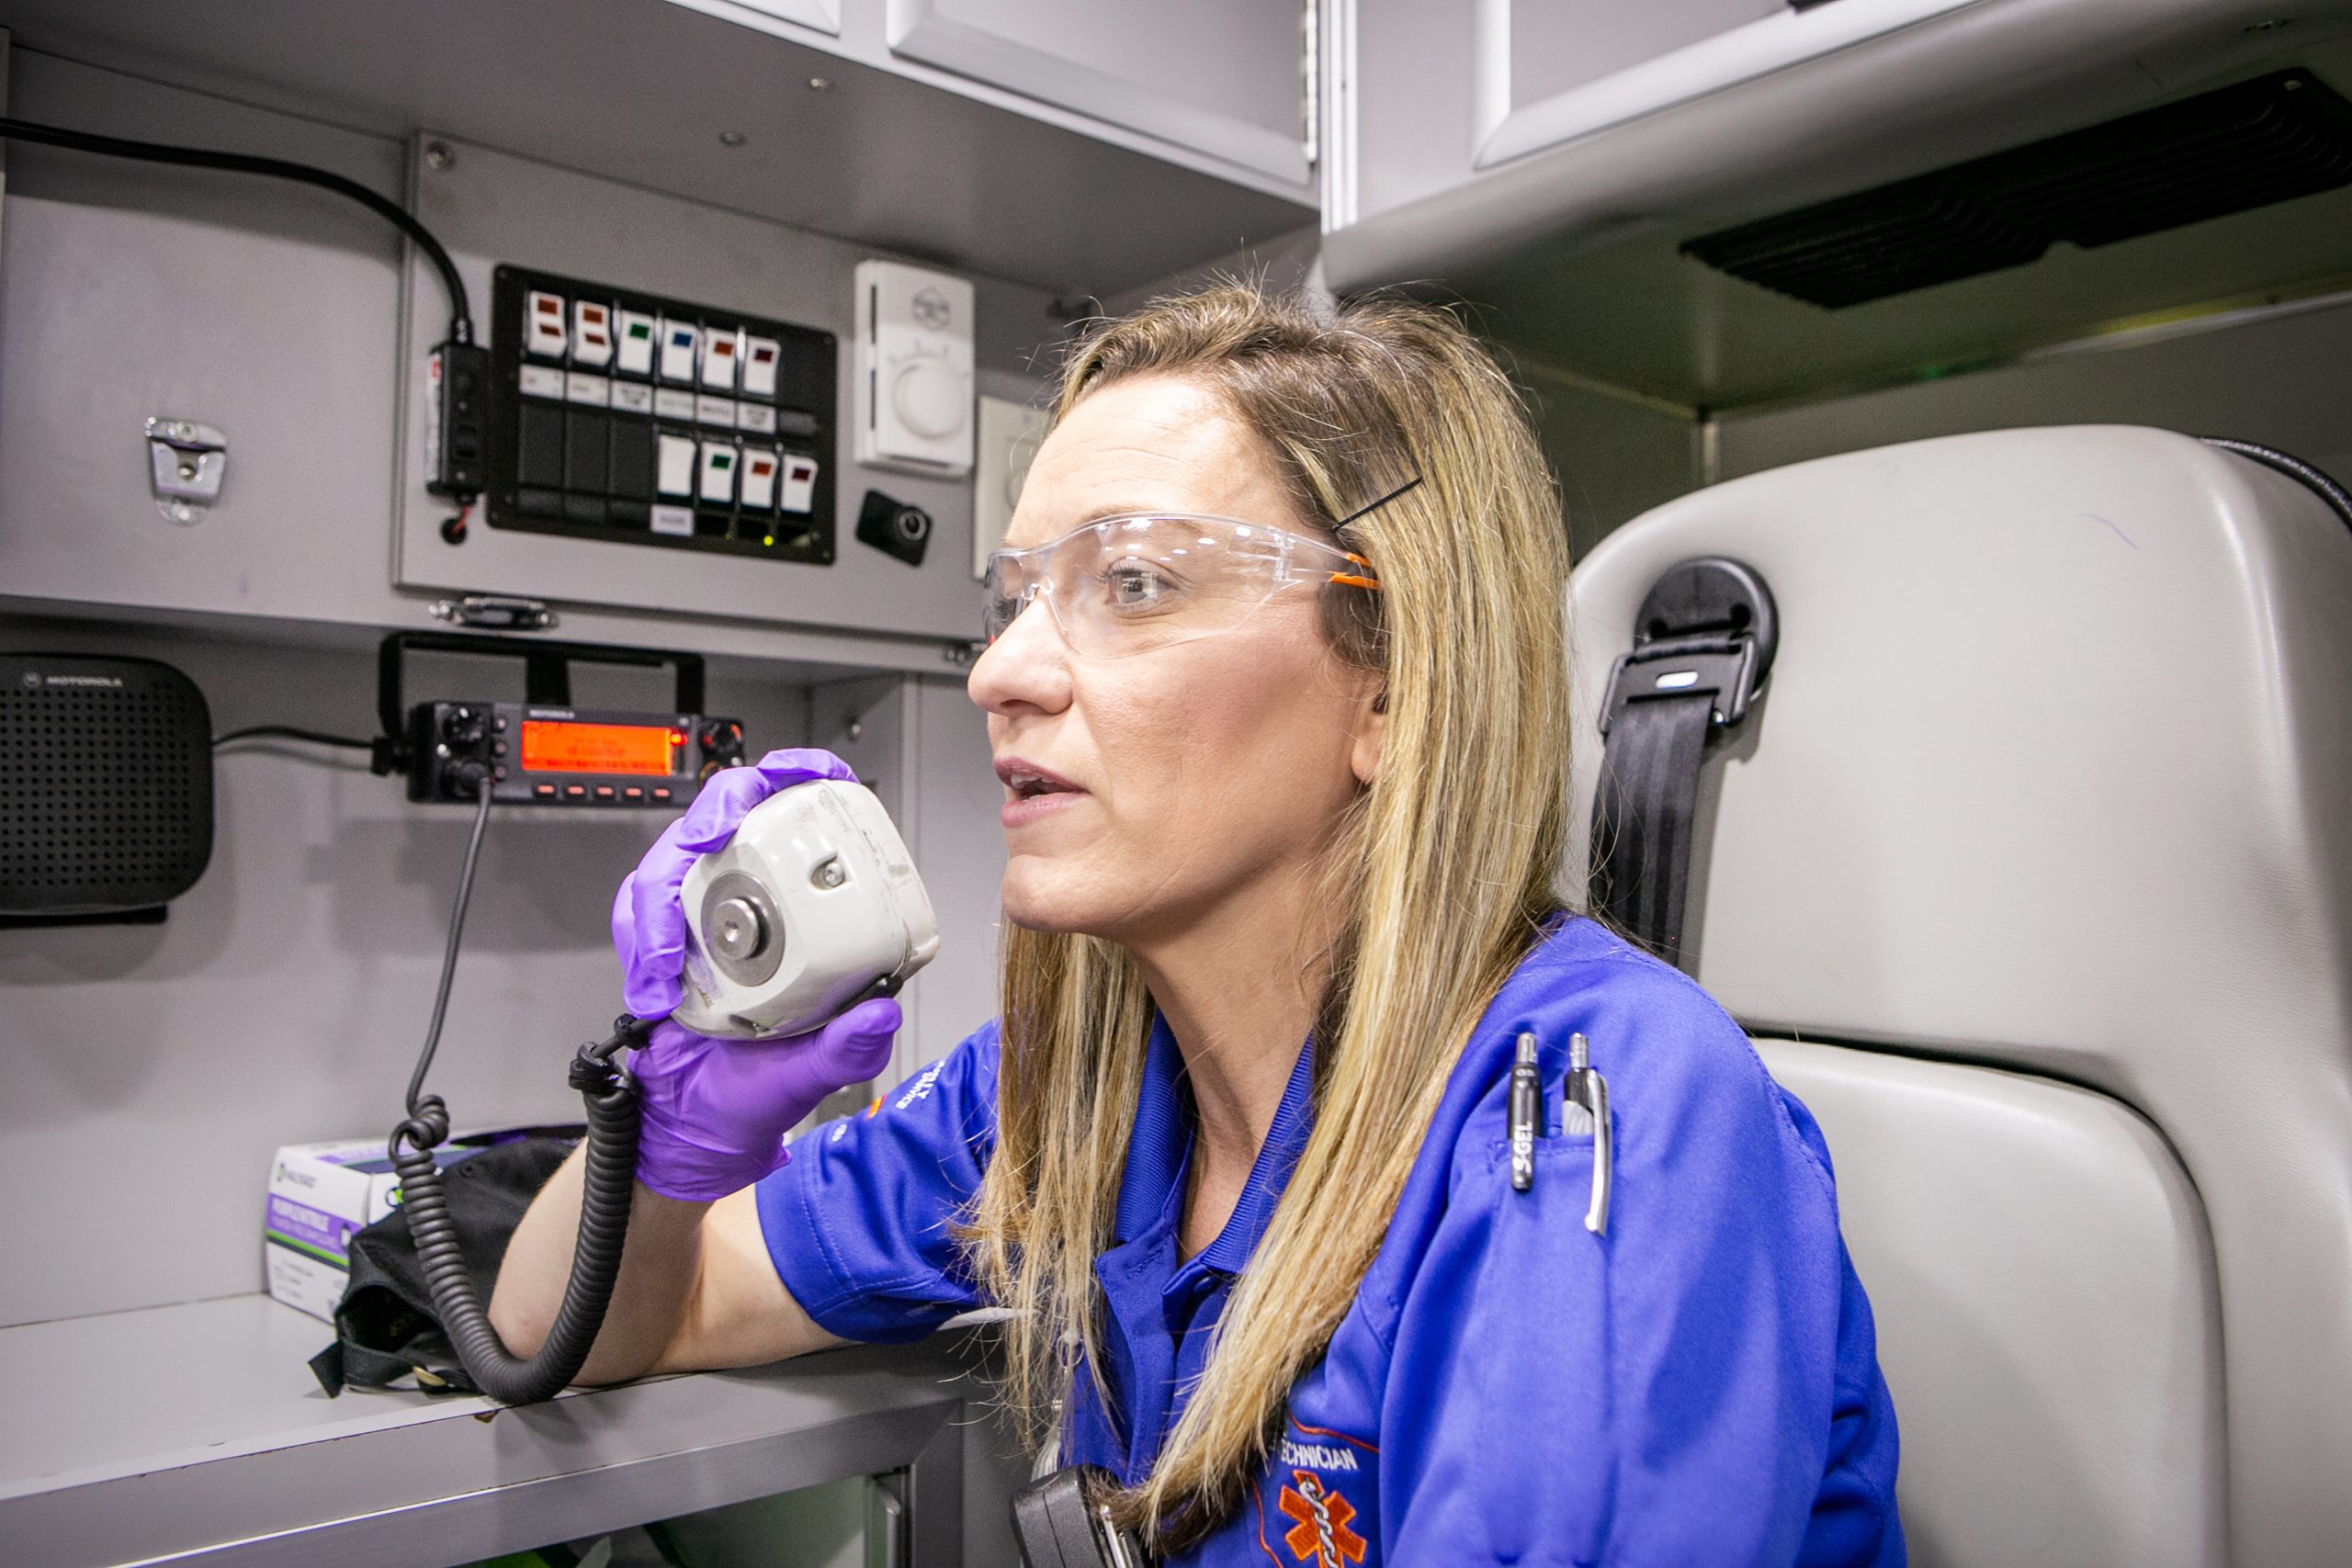 Cathy Hart has a bachelor’s degree in microbiology from the University of Central Florida, is finishing up 1,200 hours of instruction and clinical training, and riding with a mentor paramedic on days she is not scheduled to work. 